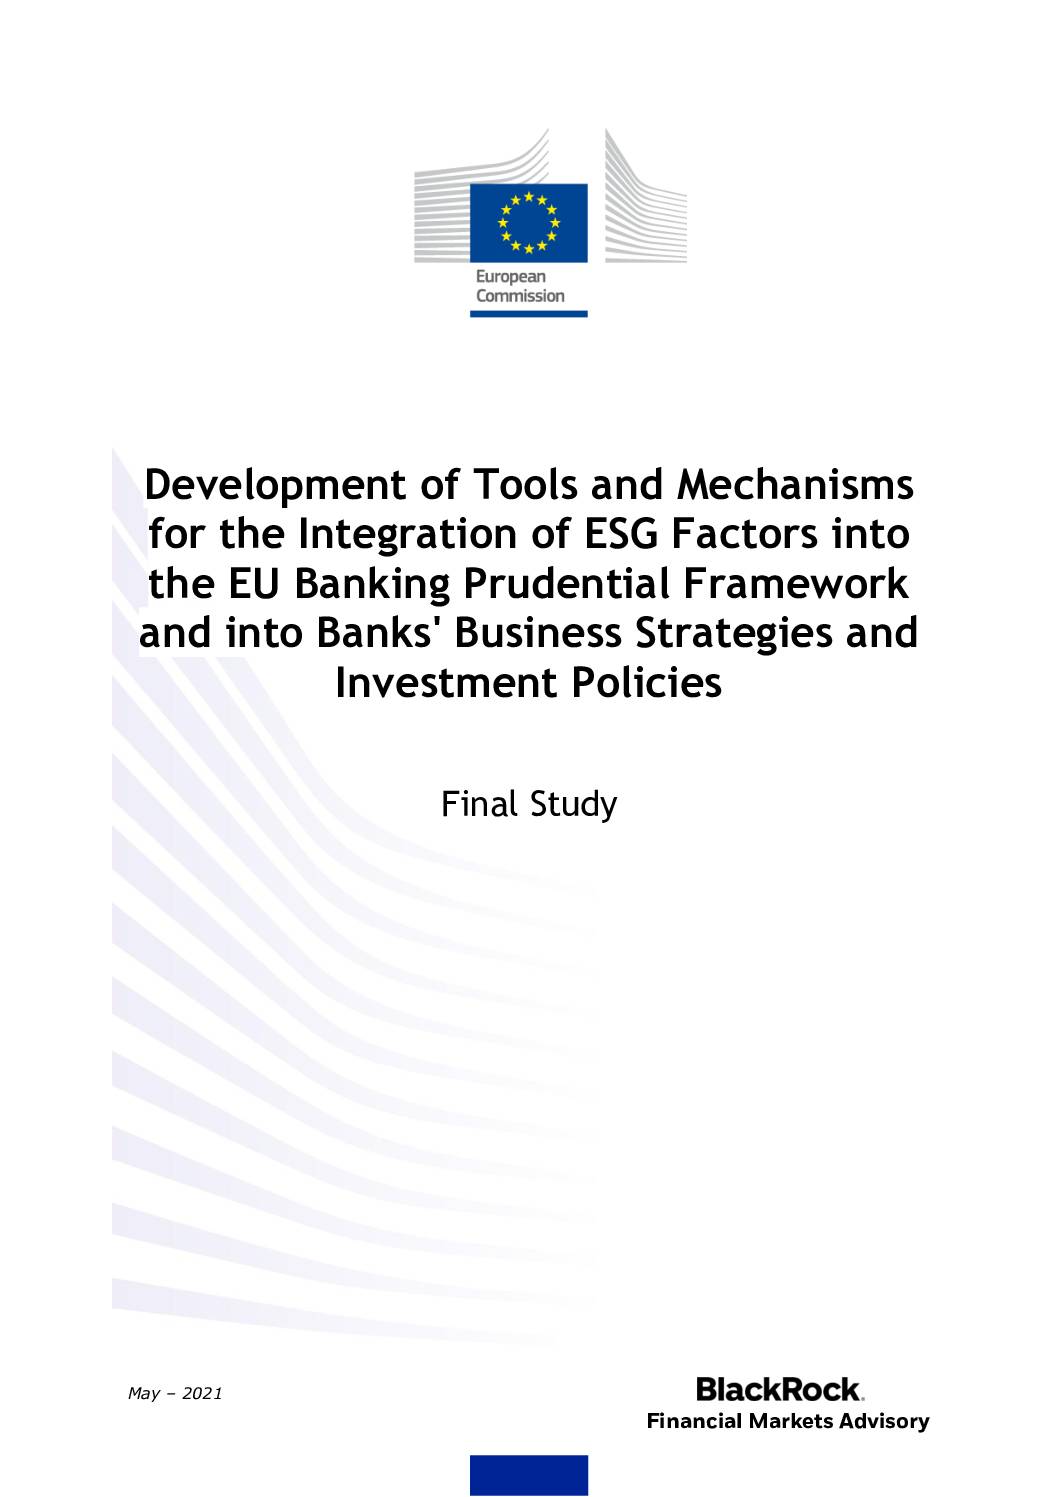 Development of Tools and Mechanisms for the Integration of ESG Factors into the EU Banking Prudential Framework and into. Banks’ Business Strategies and Investment Policies